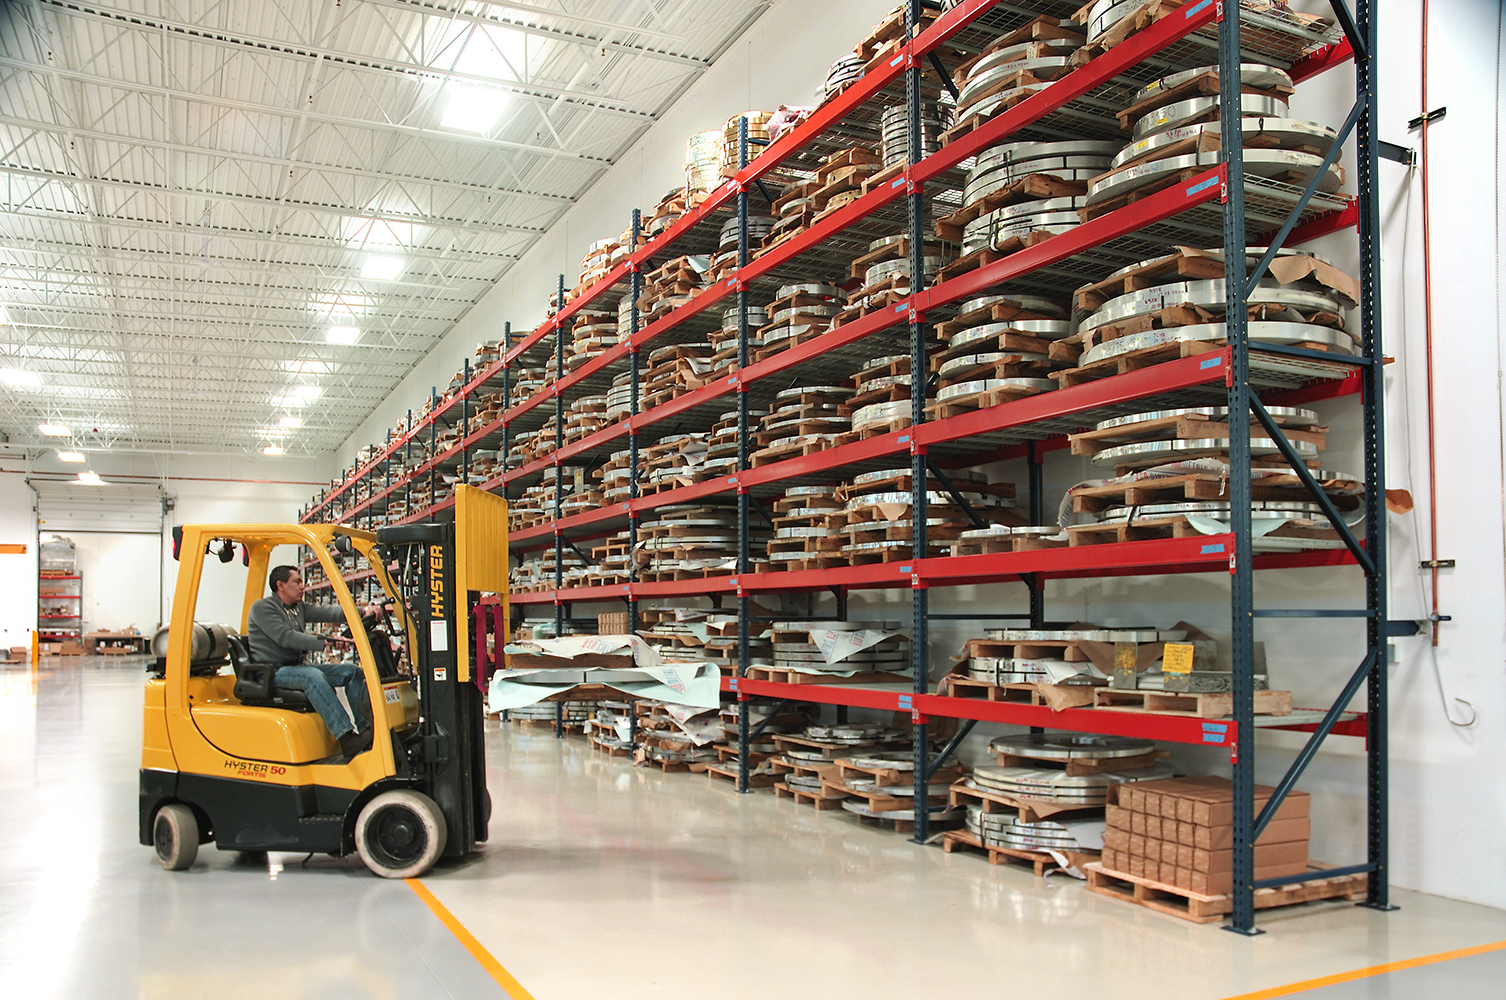 Warehouse showing racks and fork lift